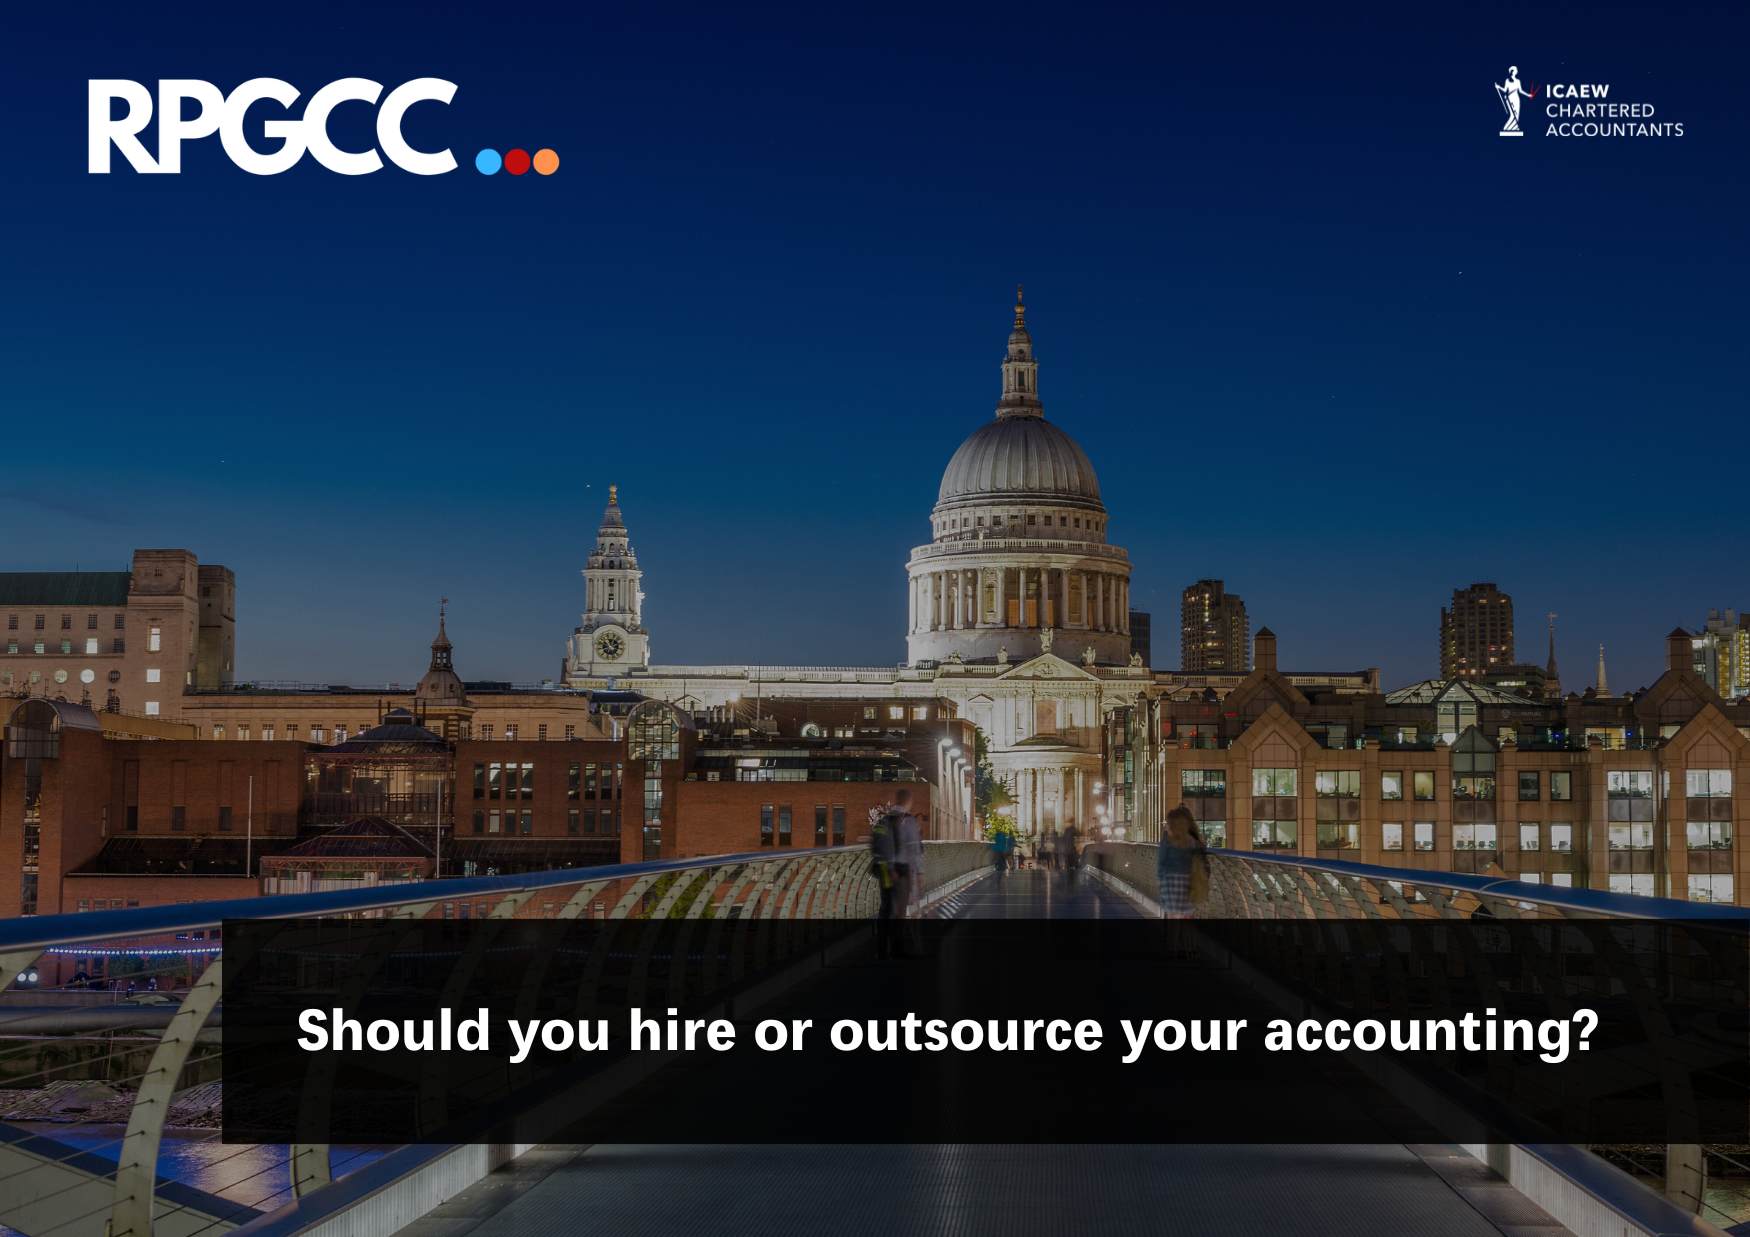 Should you hire or outsource your accounting?